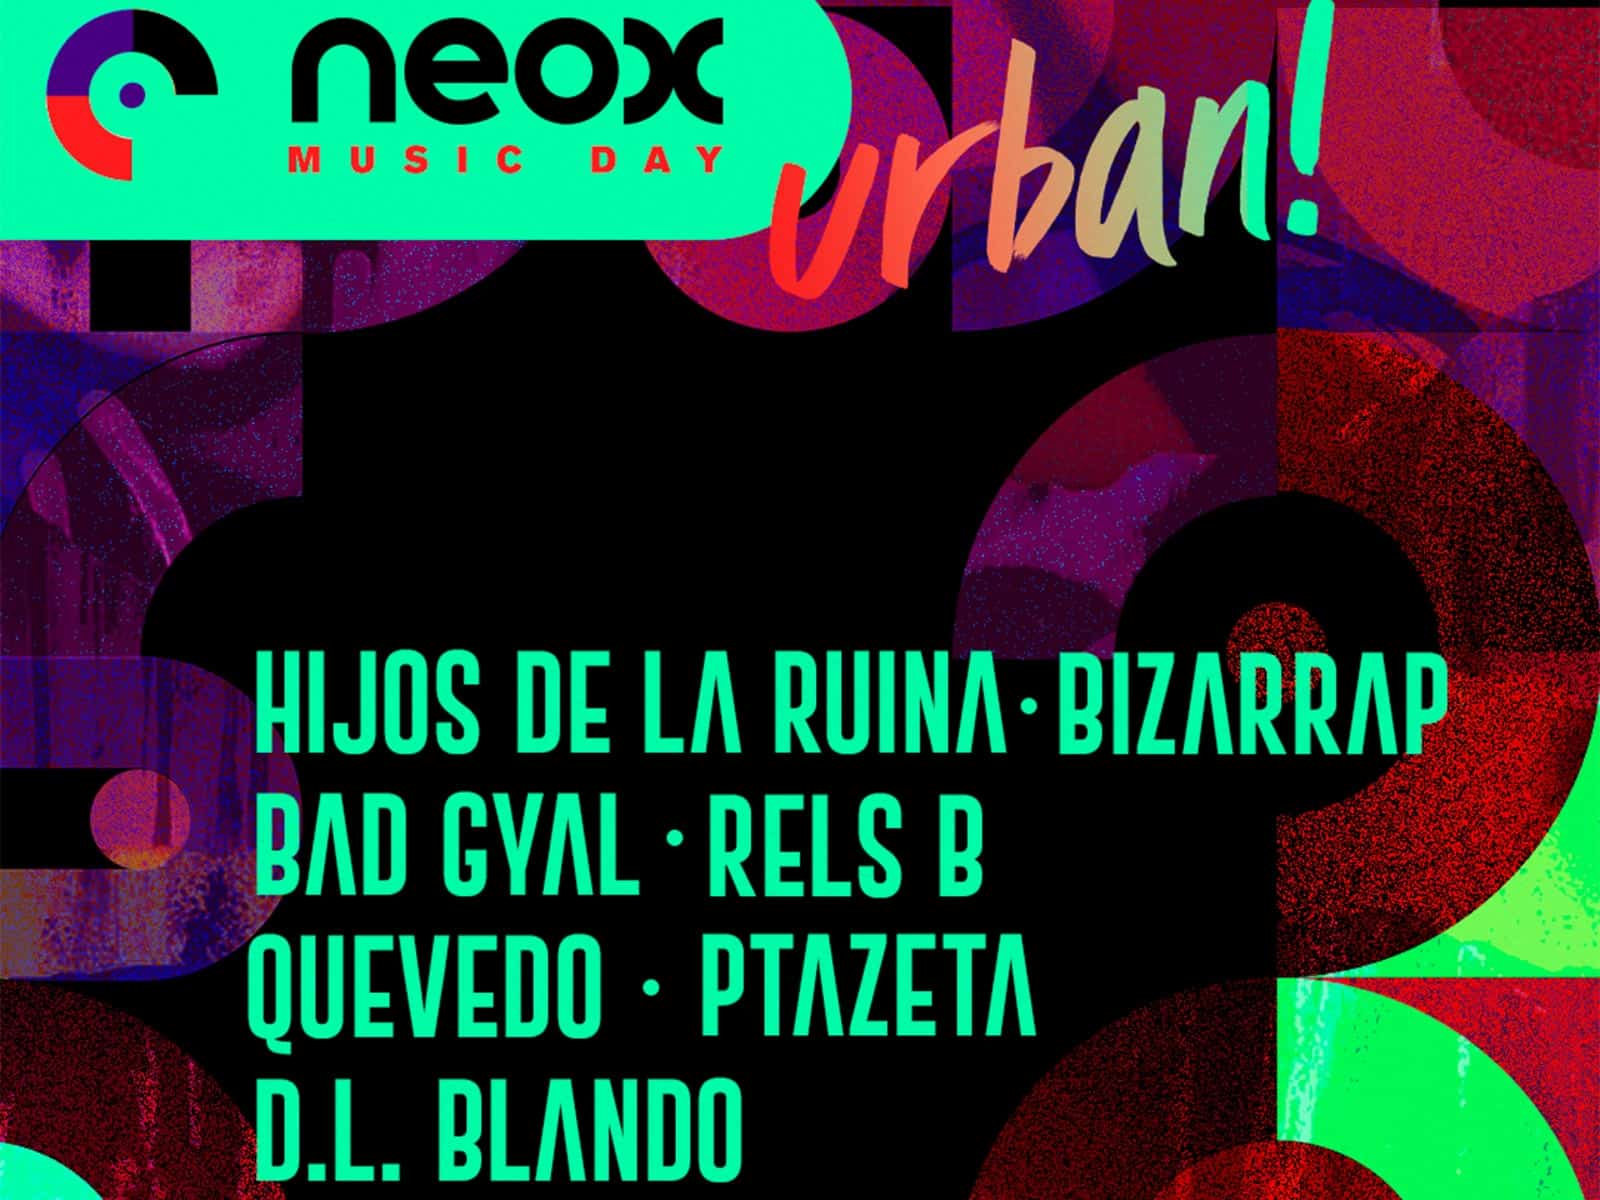 Neox Music Day comes to A Coruña with an exclusive selection of artists